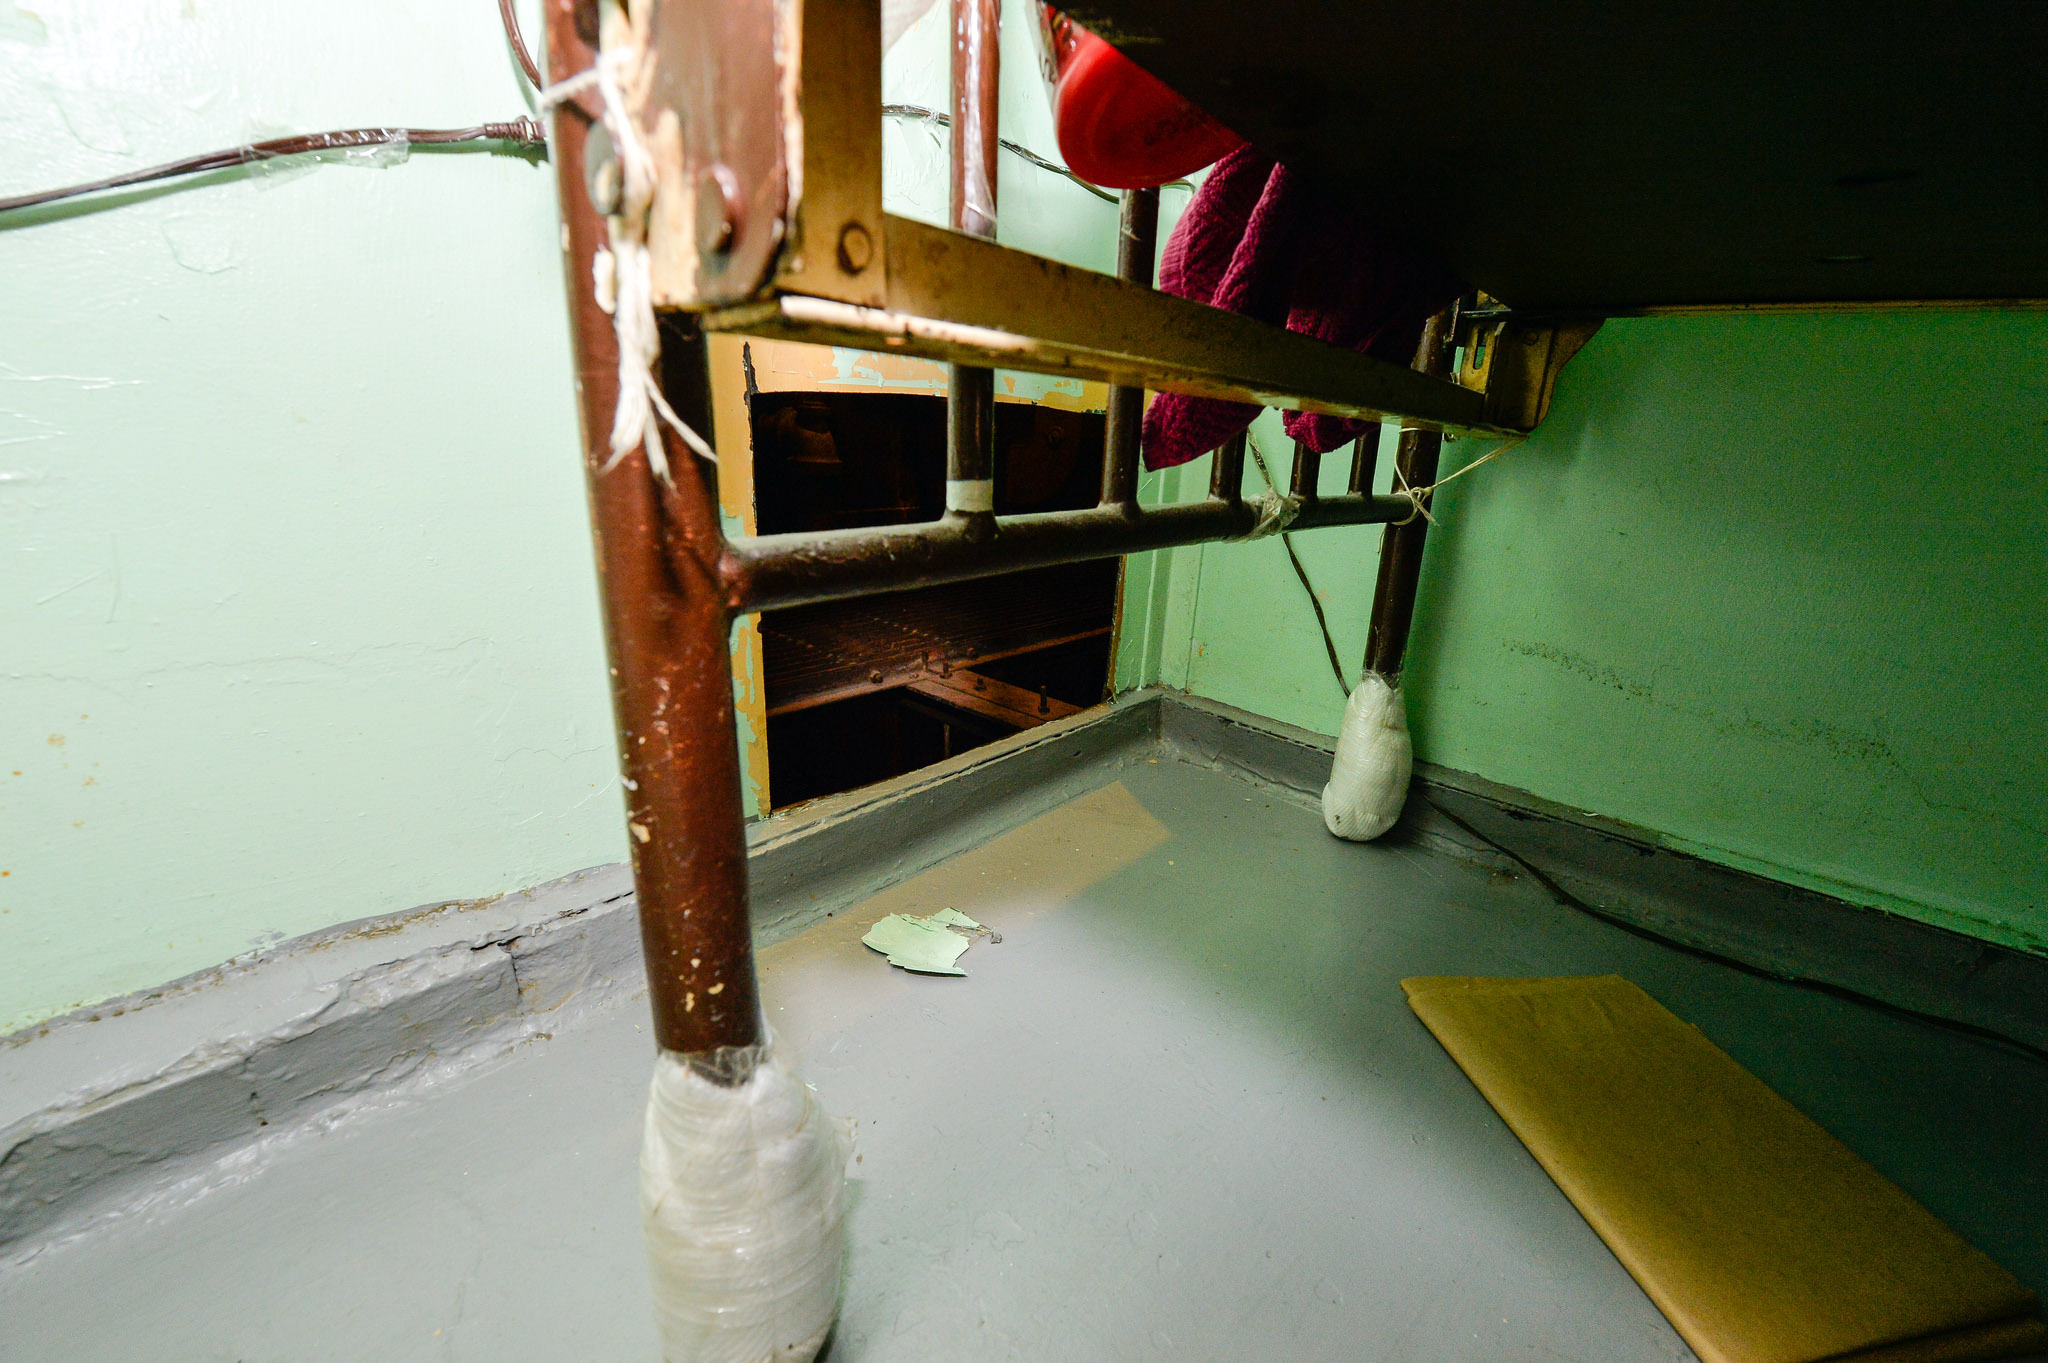 PHOTO: The area where two convicted murderers used power tools to cut through steel pipes at a maximum-security prison in Dannemora, NY, and escaped through a manhole, New York Gov. Andrew Cuomo said Saturday, June 6, 2015.